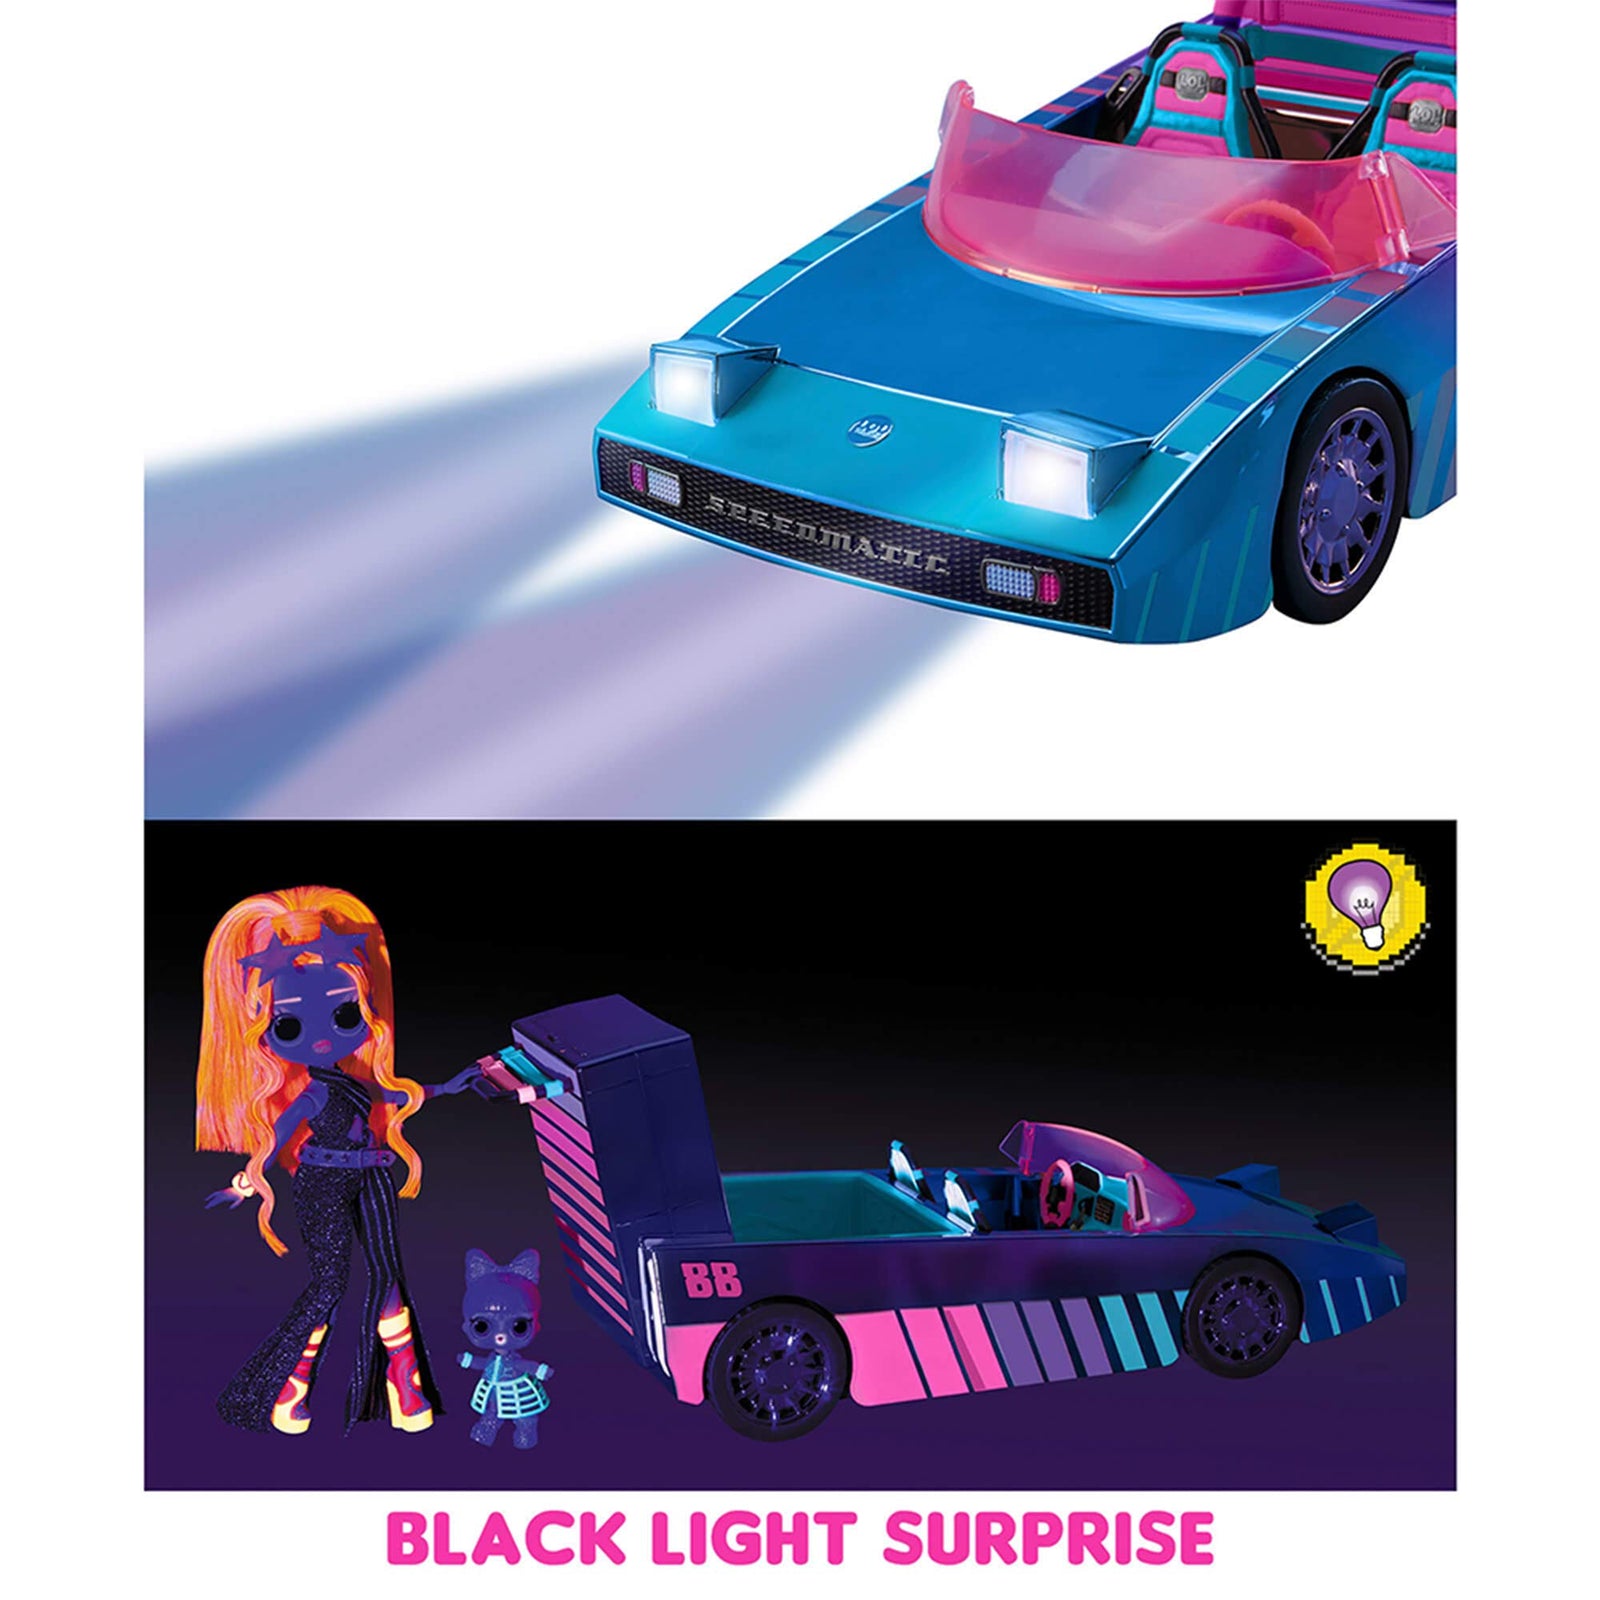 LOL Surprise Dance Machine Car with Exclusive Doll, Surprise Pool and Dance Floor, Multicolor and Magic Blacklight, for Kids